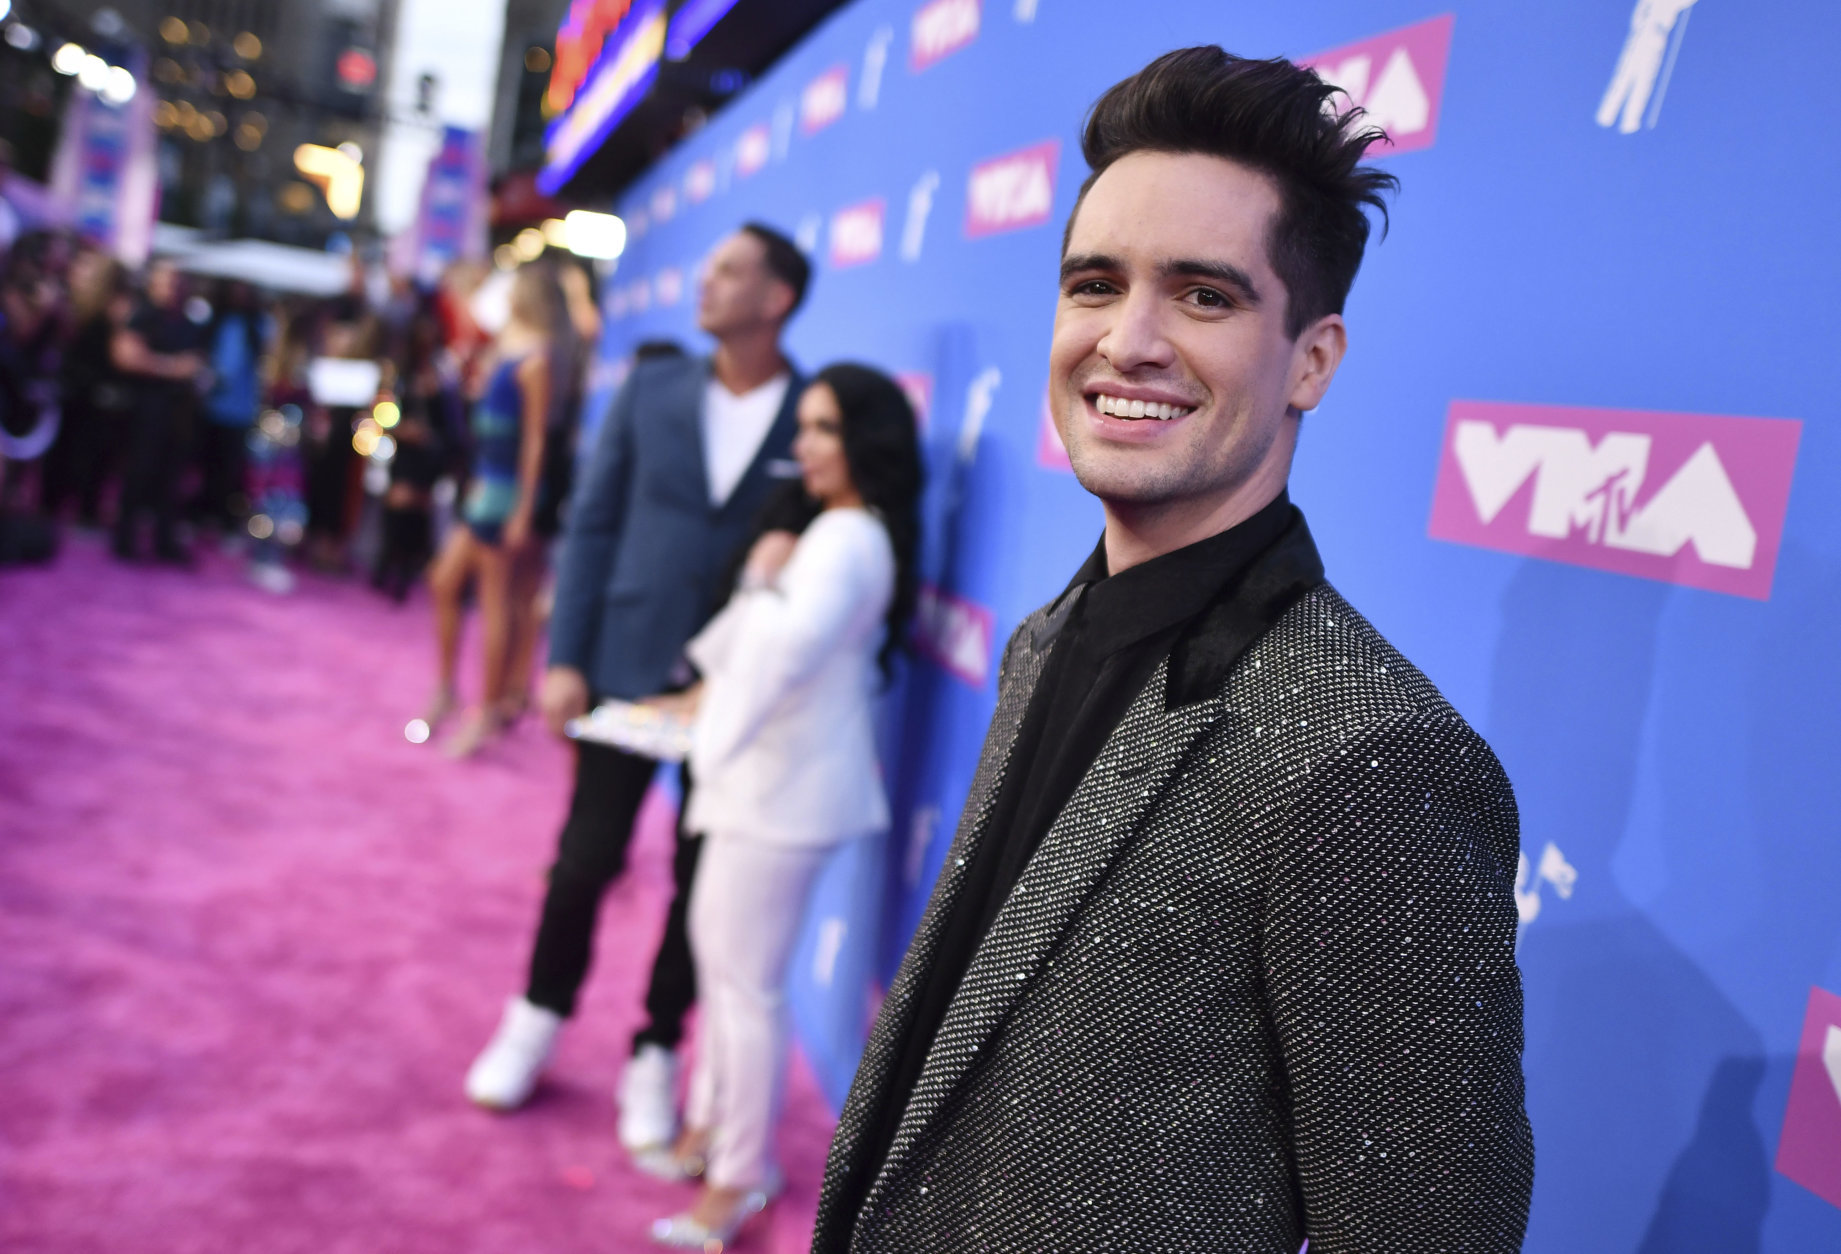 Brendon Urie arrives at the MTV Video Music Awards at Radio City Music Hall on Monday, Aug. 20, 2018, in New York. (Photo by Charles Sykes/Invision/AP)